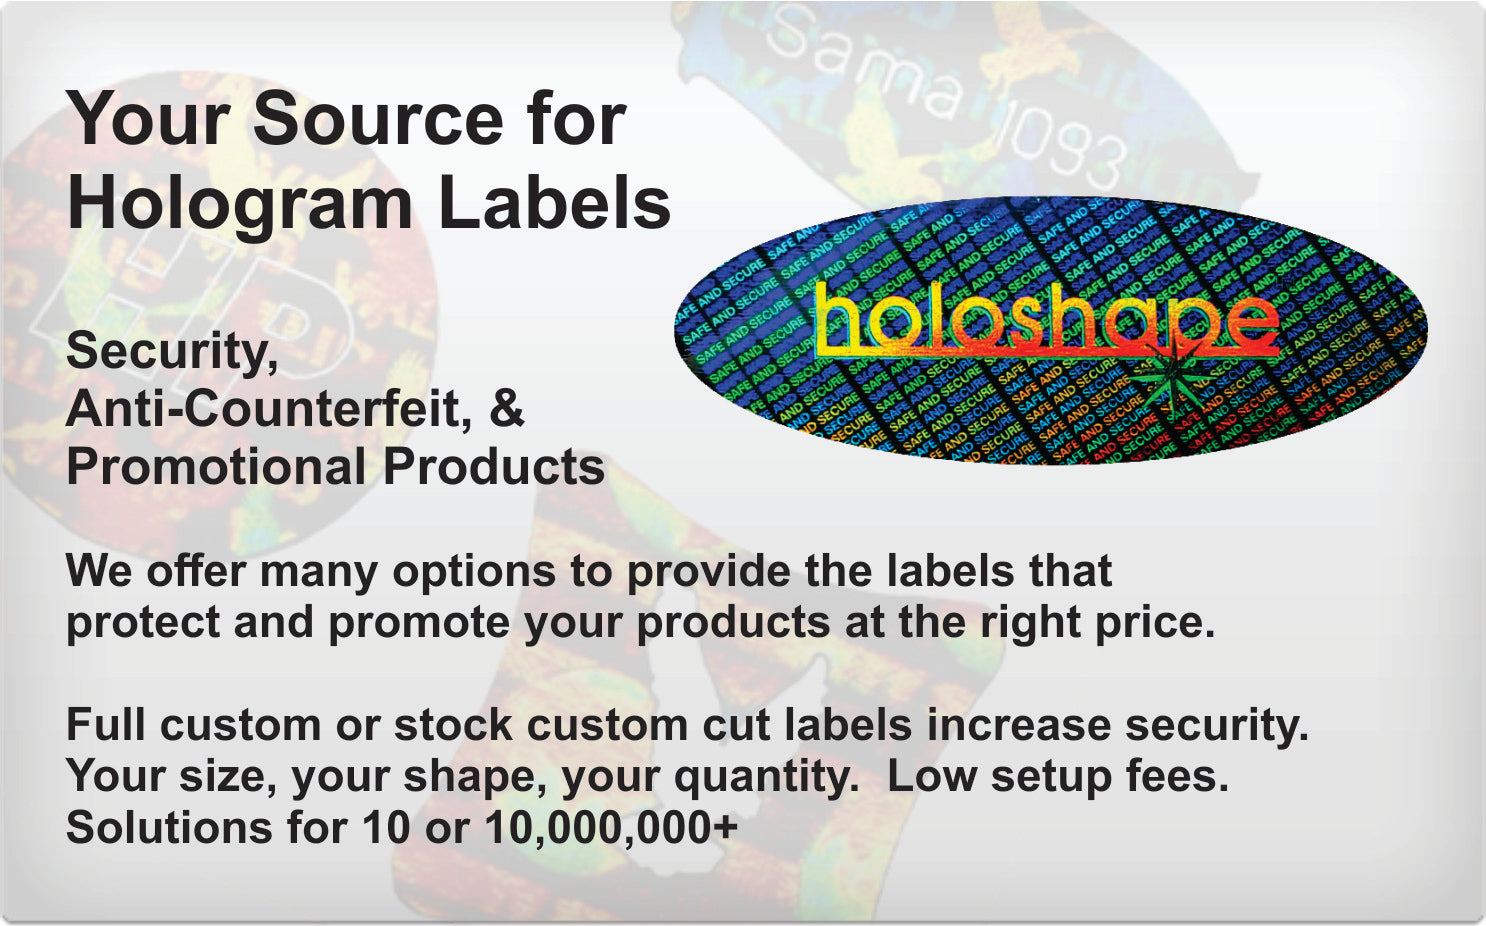 Your Source for Hologram Labels